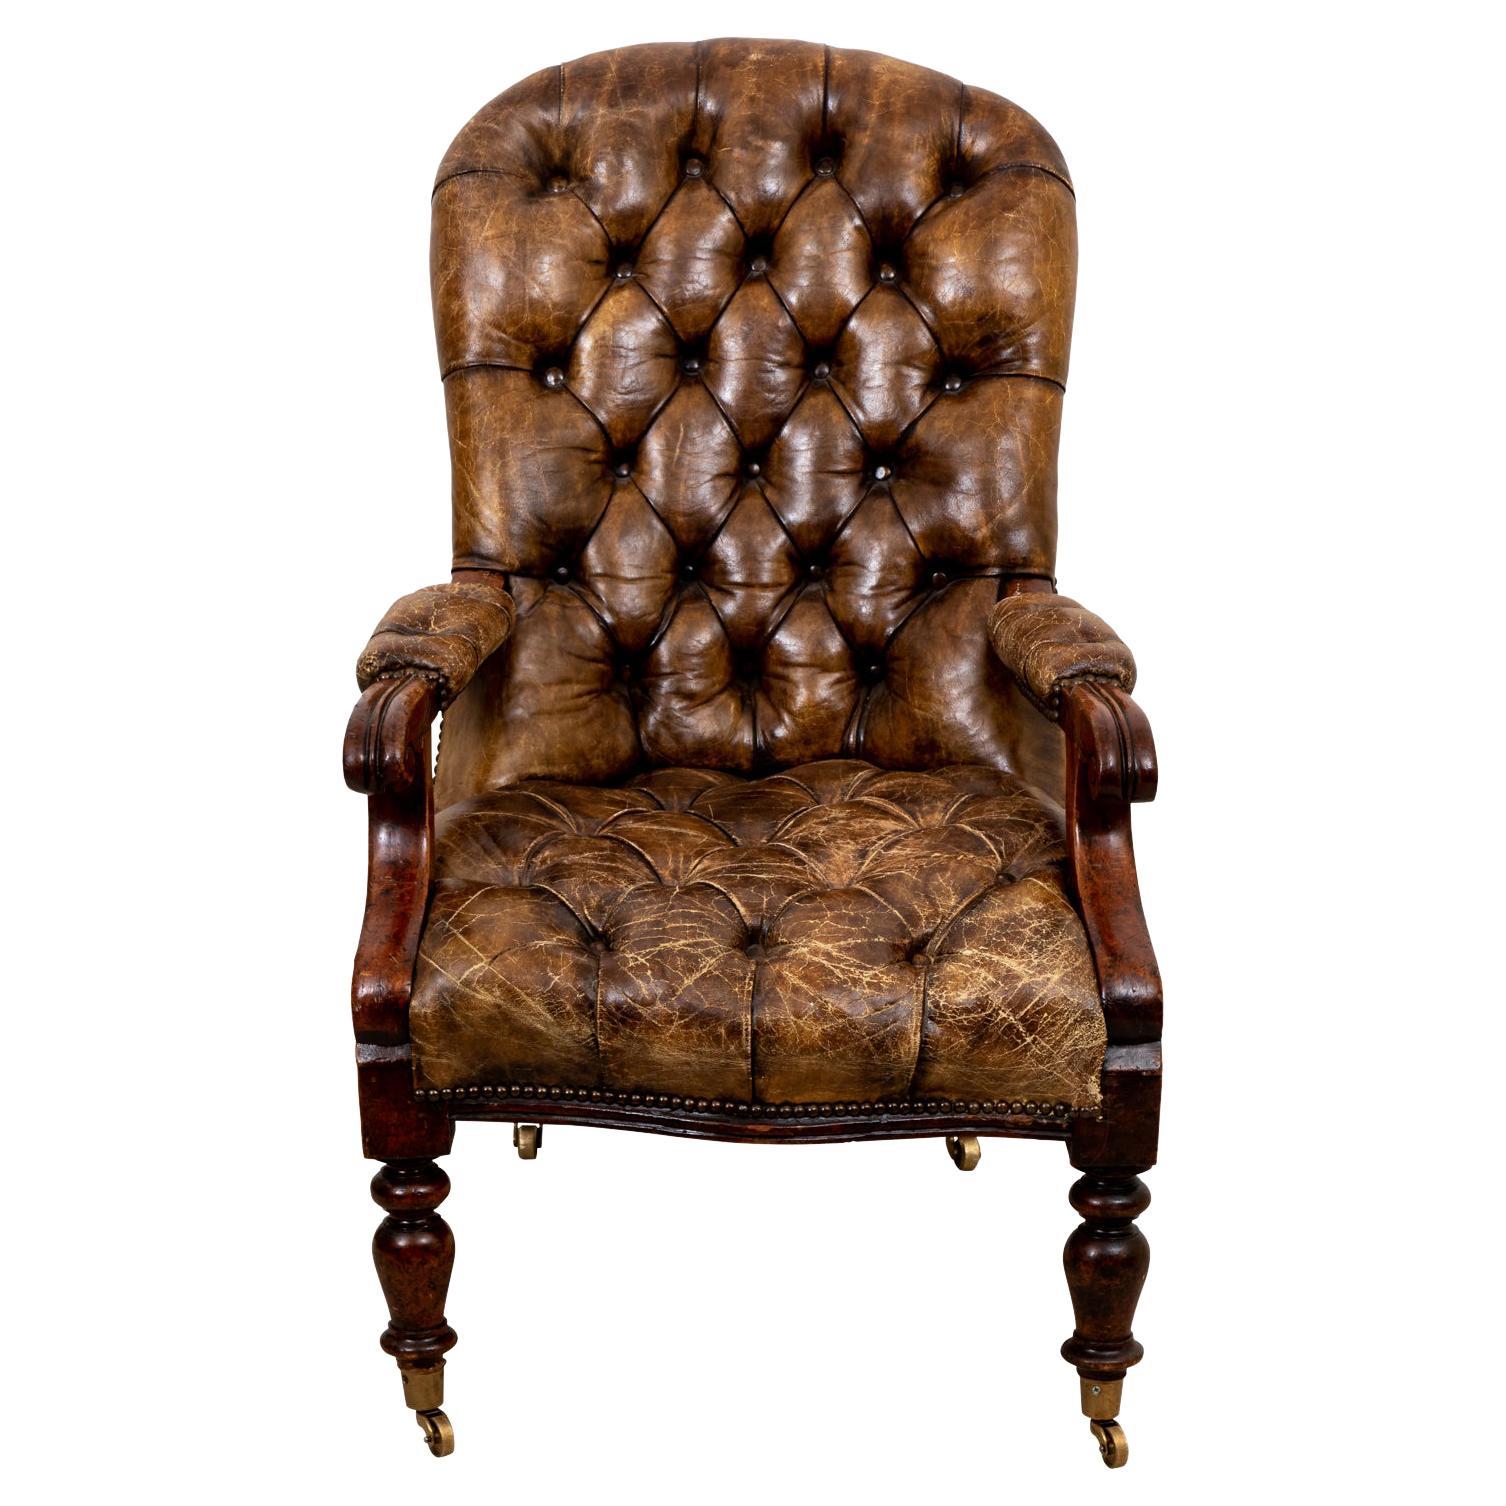 English Leather Library Chair